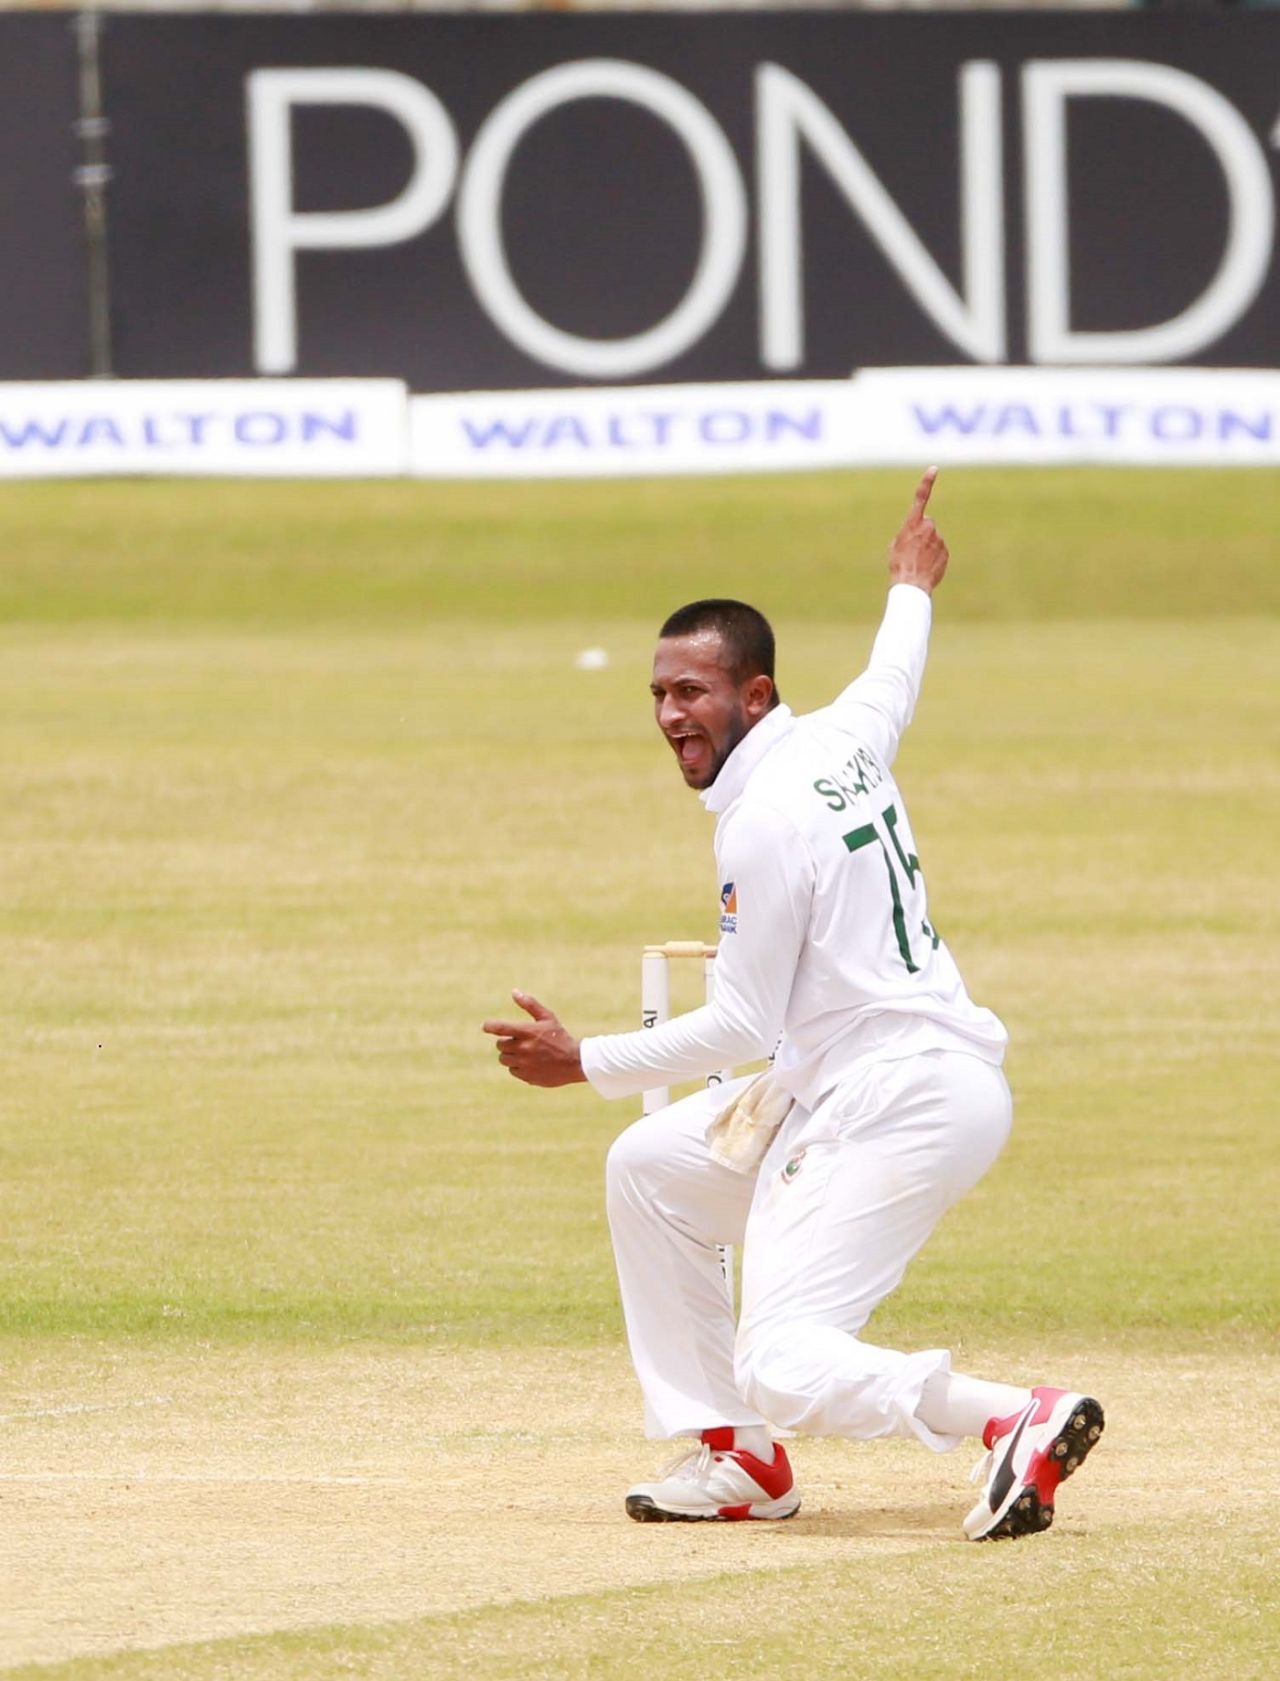 Shakib Al Hasan appeals successfully to send Ihsanullah back lbw, Bangladesh v Afghanistan, Only Test, Chattogram, 3rd day, September 7, 2019